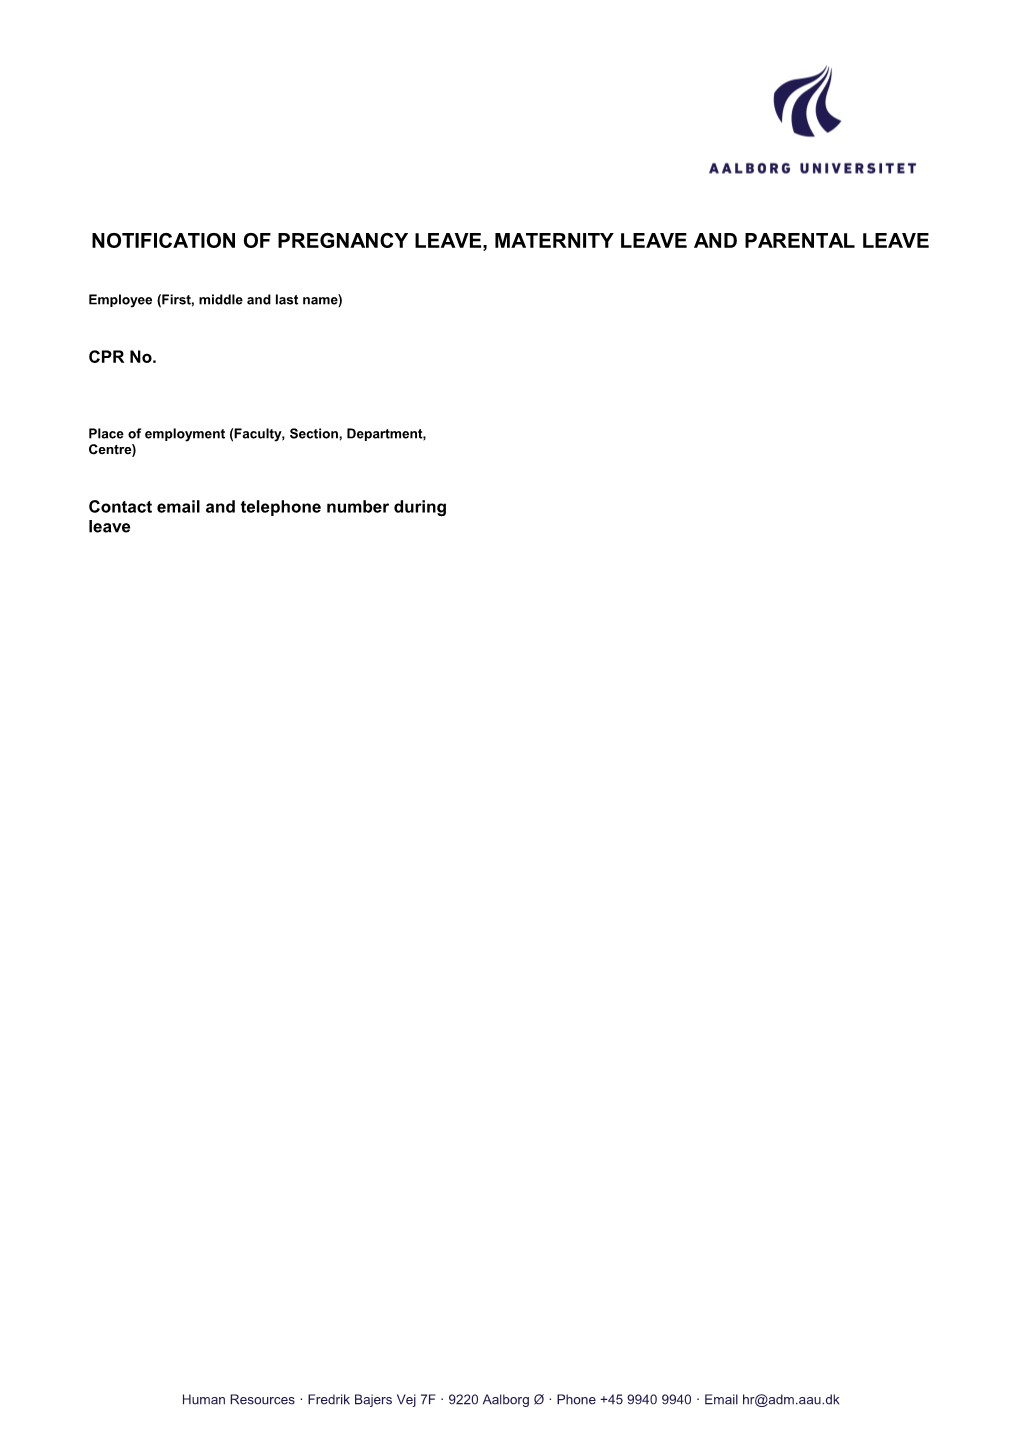 Notification of Pregnancy Leave, Maternity Leave and Parental Leave